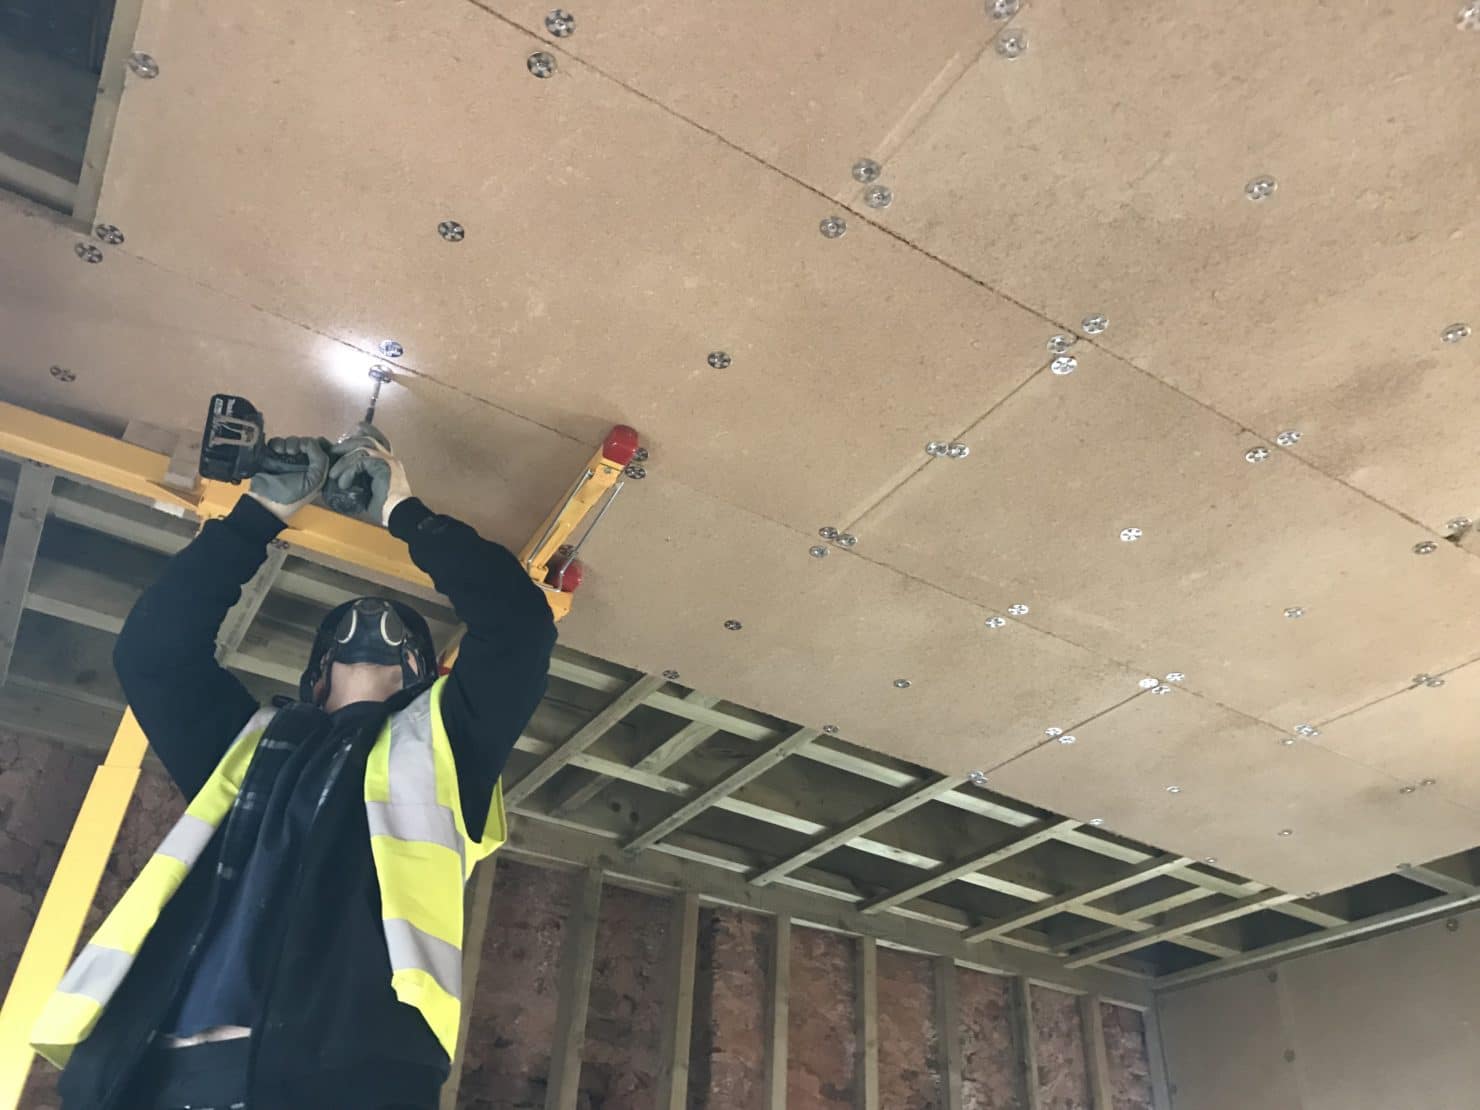 Material in action.

Here you can see the EBB clay boards being attached to a new ceiling using stainless steel screws and stainless steel washers. This is a useful image as it shows how the fixings should be spaced and how many fixing points the boards need when used on a ceiling.